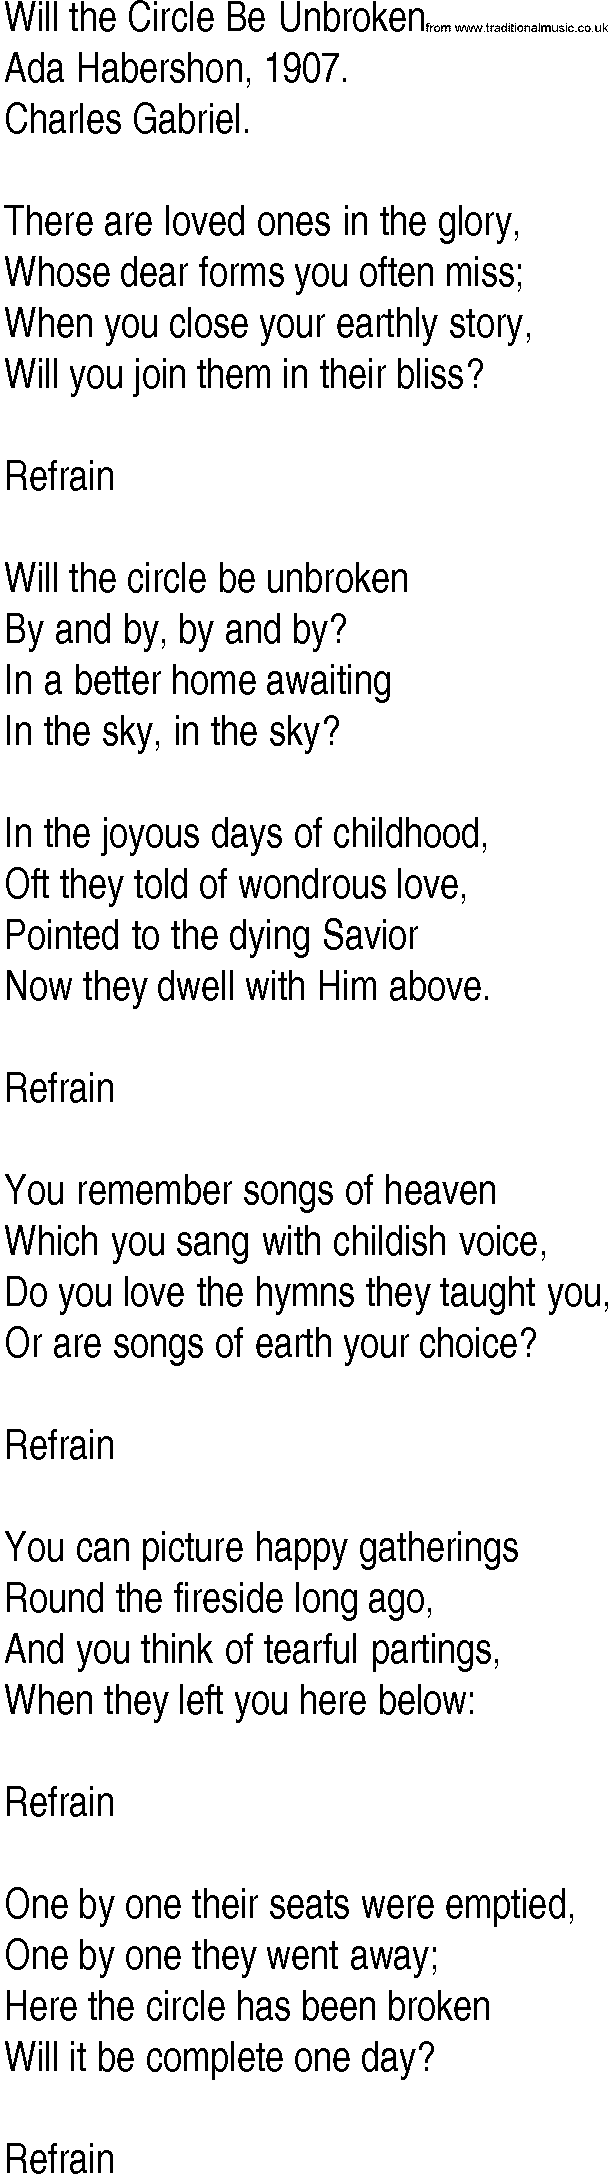 Hymn and Gospel Song: Will the Circle Be Unbroken by Ada Habershon lyrics